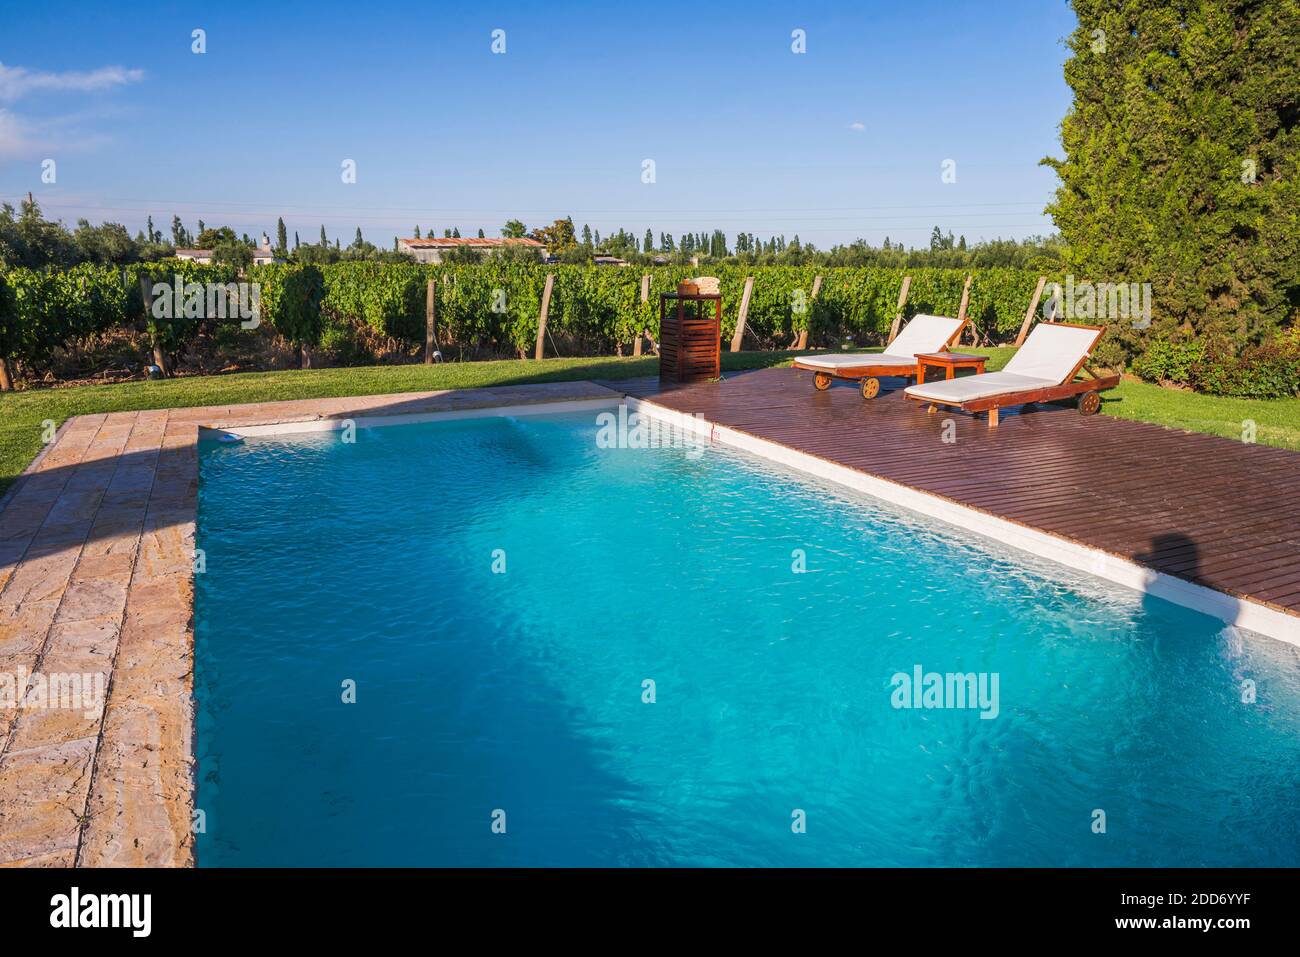 Swimming pool at Resort Club Tapiz Boutique Hotel, a Bodega (winery) and accommodation in the Maipu area of Mendoza, Mendoza Province, Argentina, South America Stock Photo